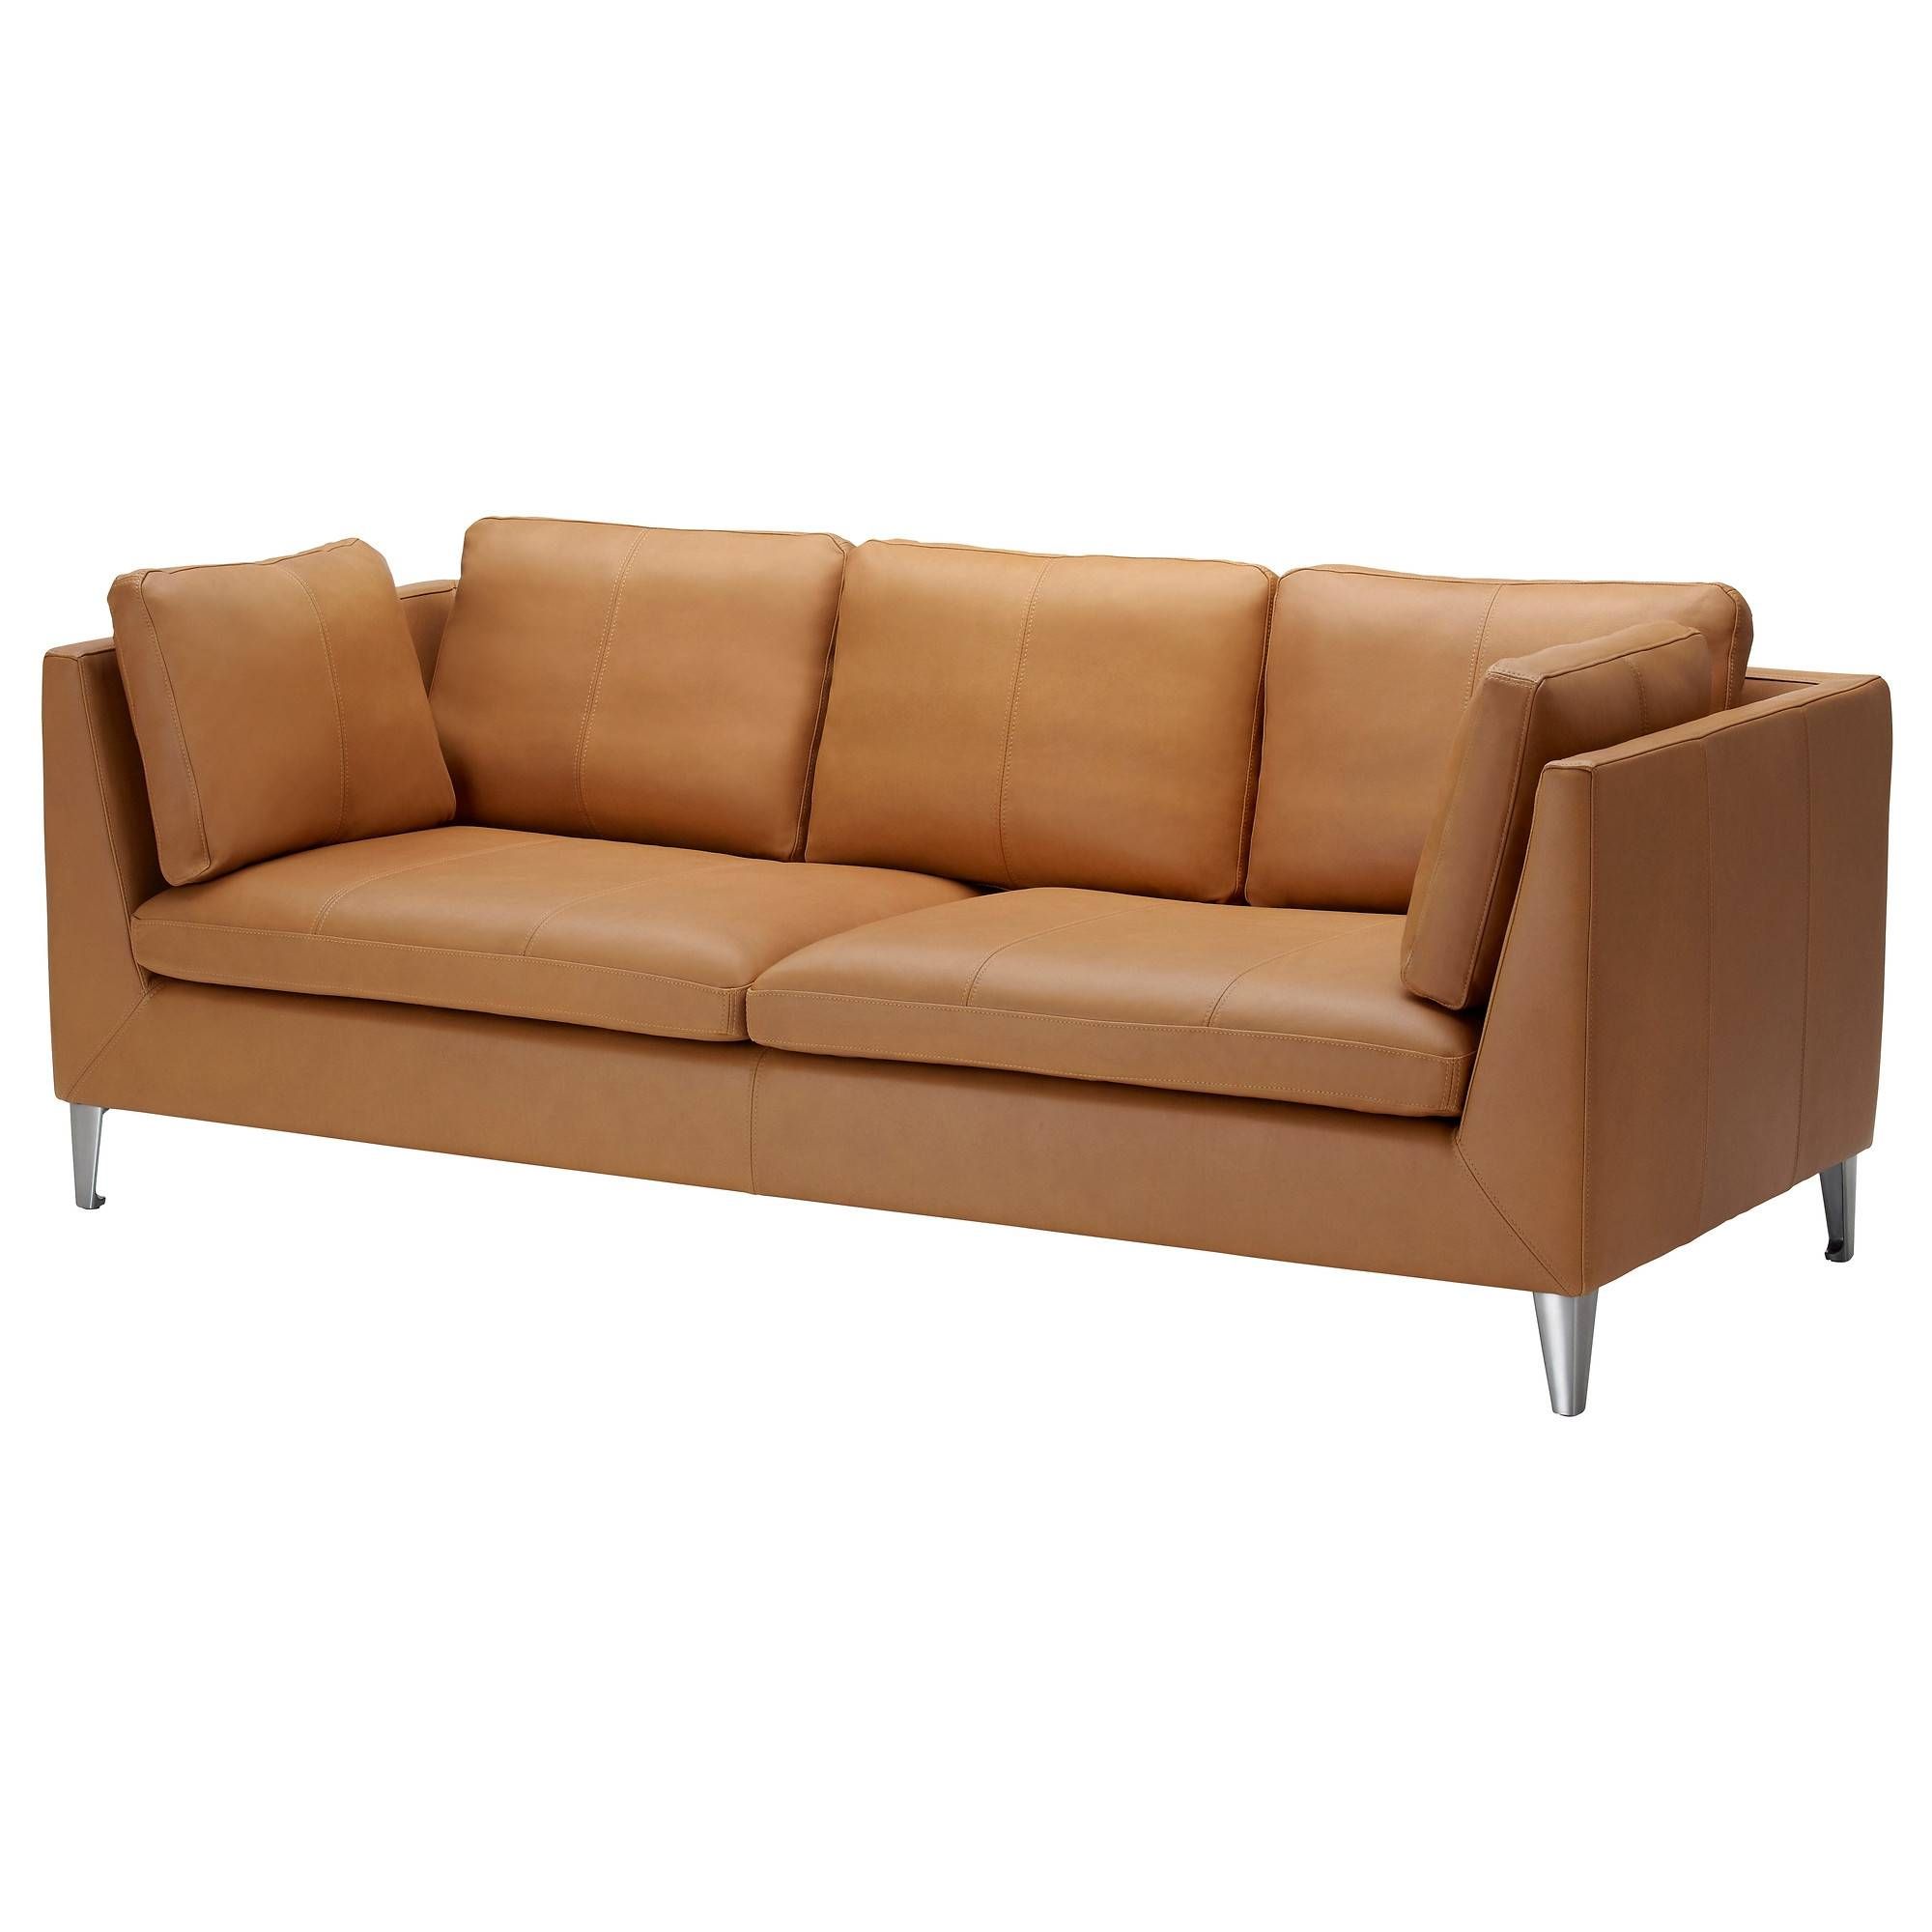 Leather & Faux Leather Couches, Chairs & Ottomans – Ikea With Regard To Mid Range Sofas (View 23 of 30)